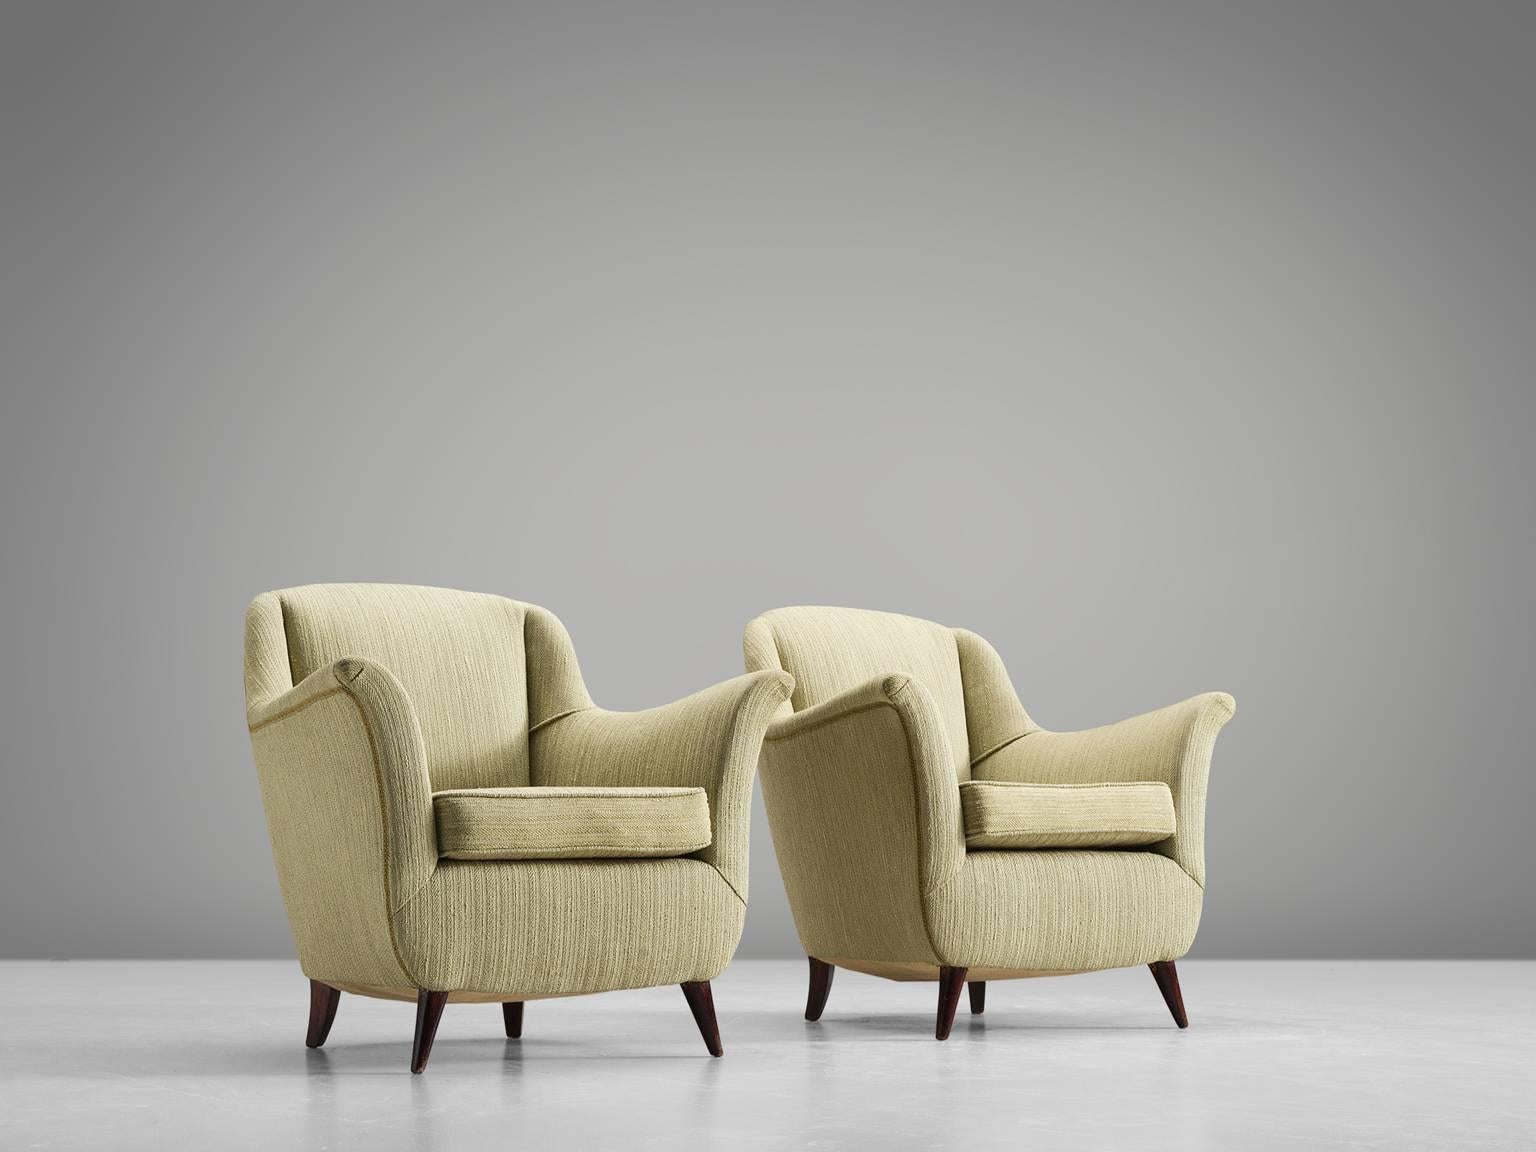 Set of armchairs, green fabric, wood, Italy, 1950s.

This set of lounge chairs is both voluptuous and grand as they are comfortable. The chairs have semi high wingbacks and feature green fabric and small tapered wooden legs. Typical curvy, bold